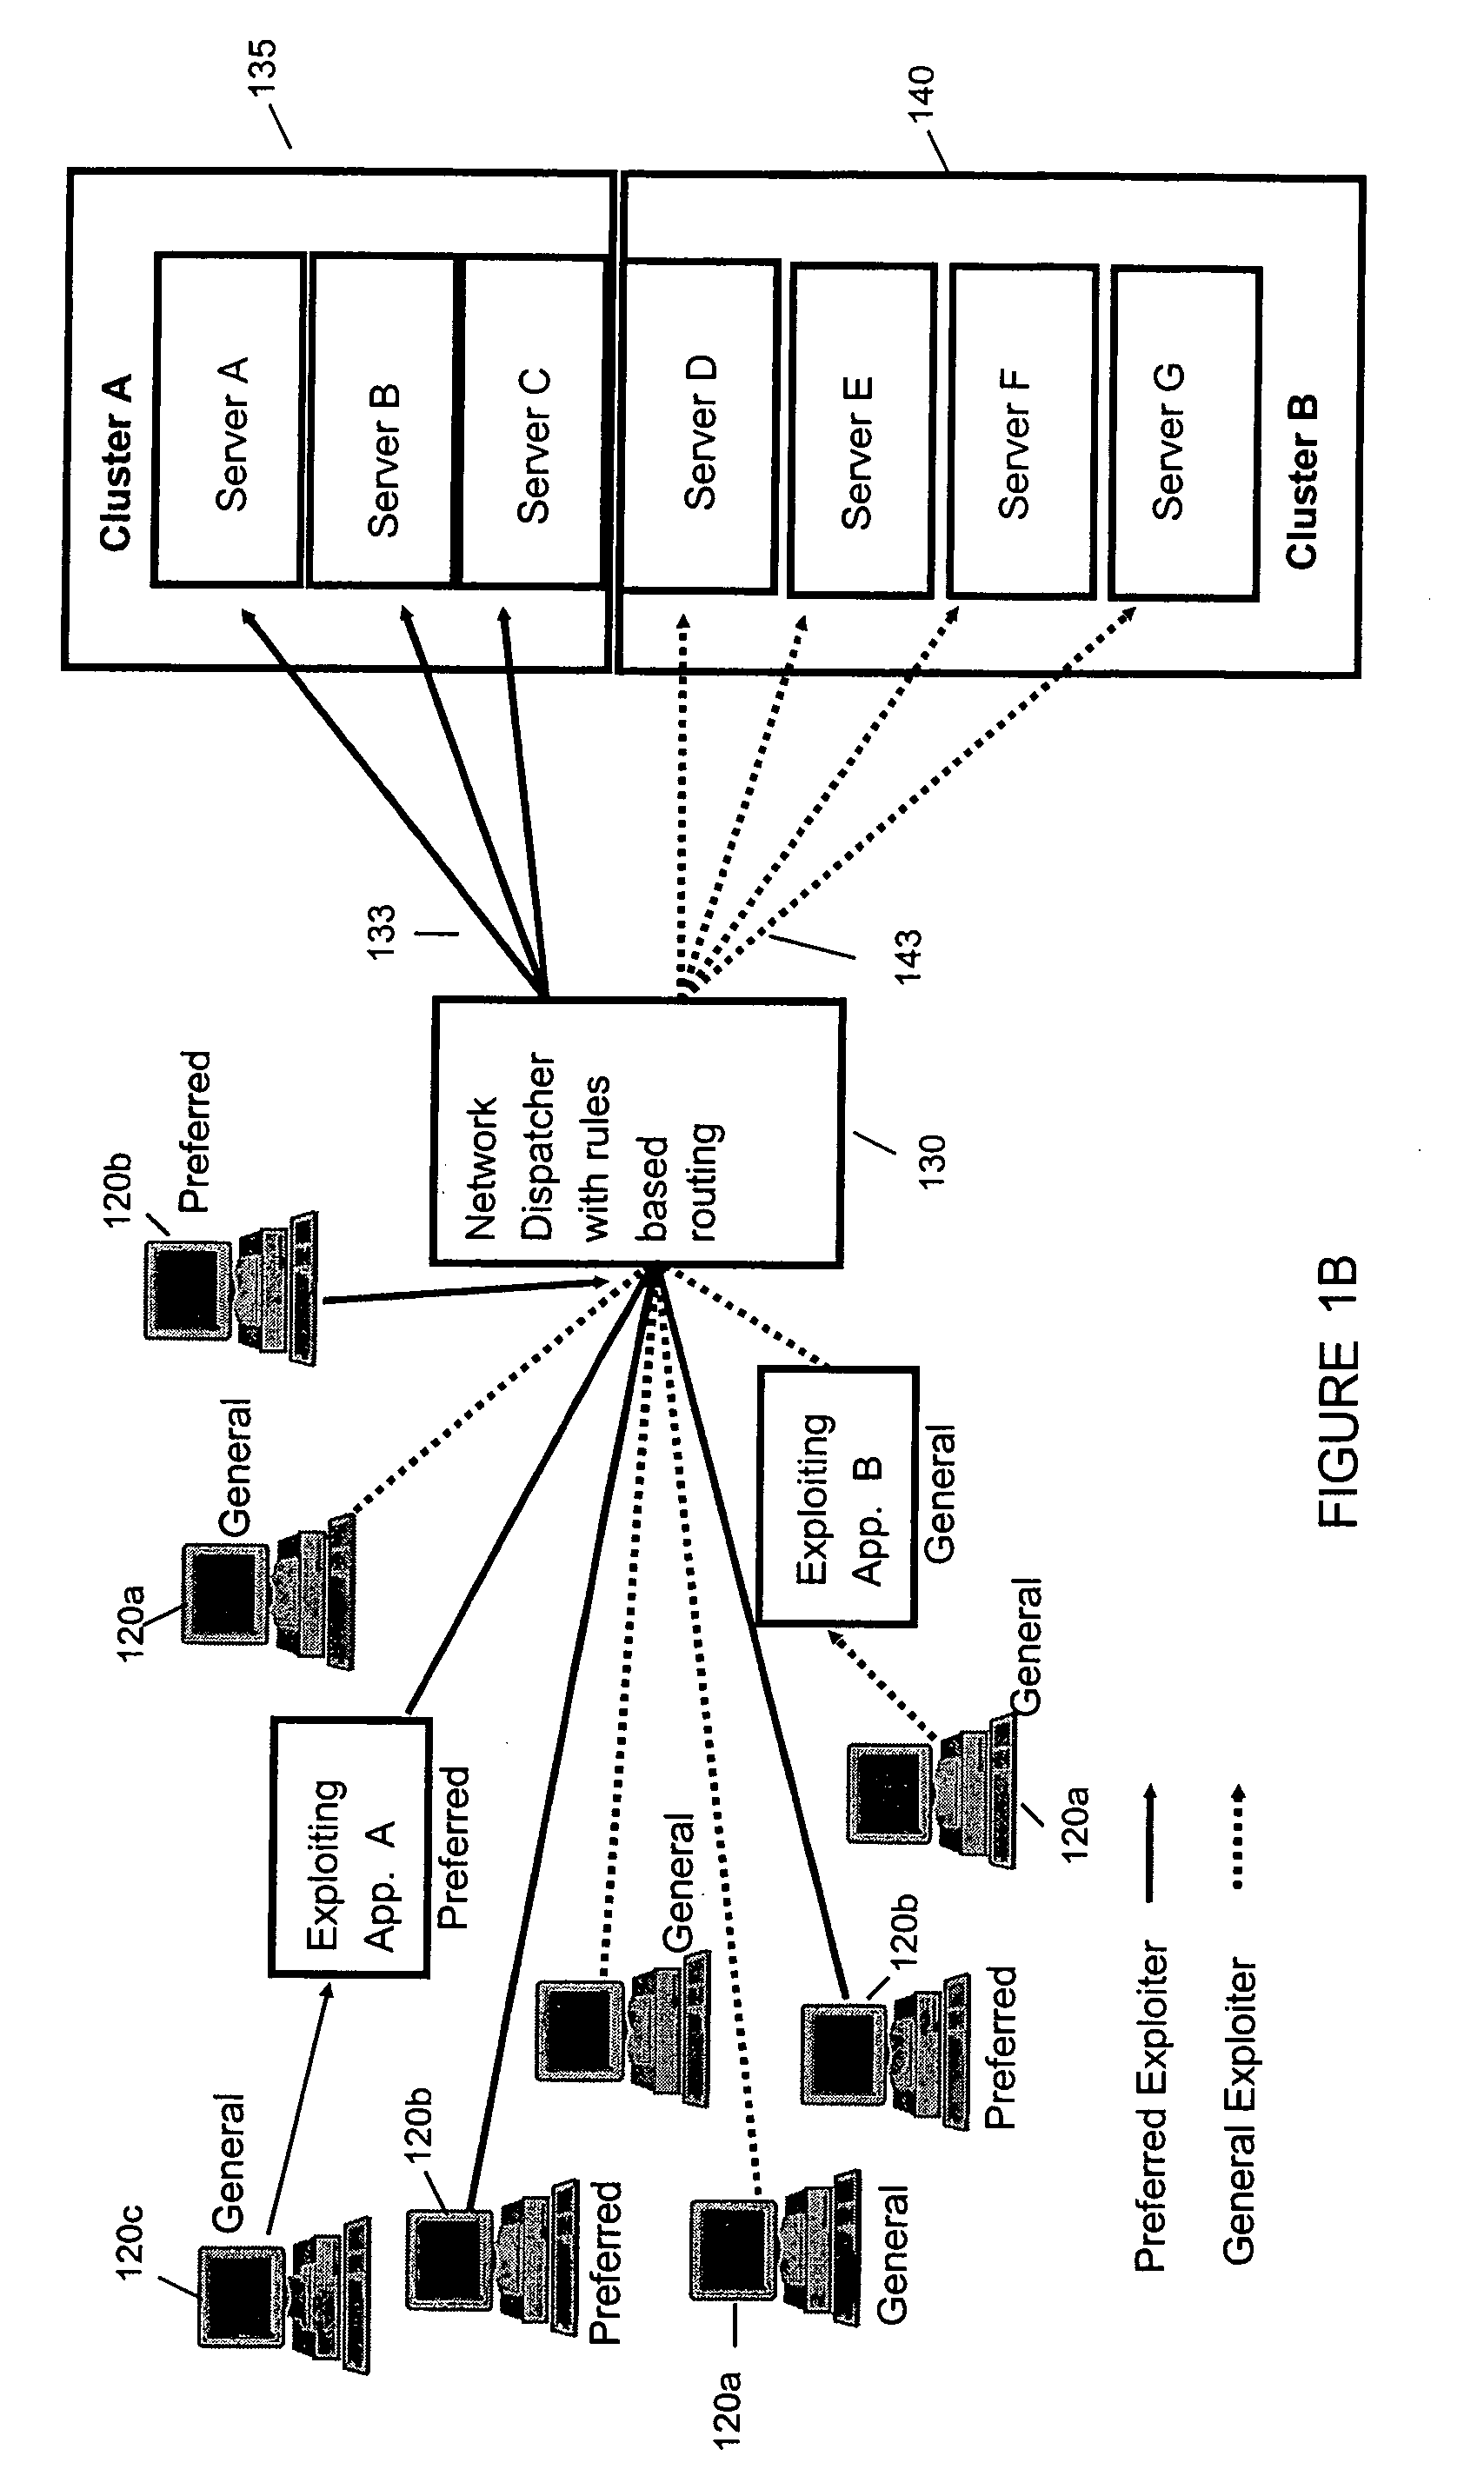 On-demand global server load balancing system and method of use